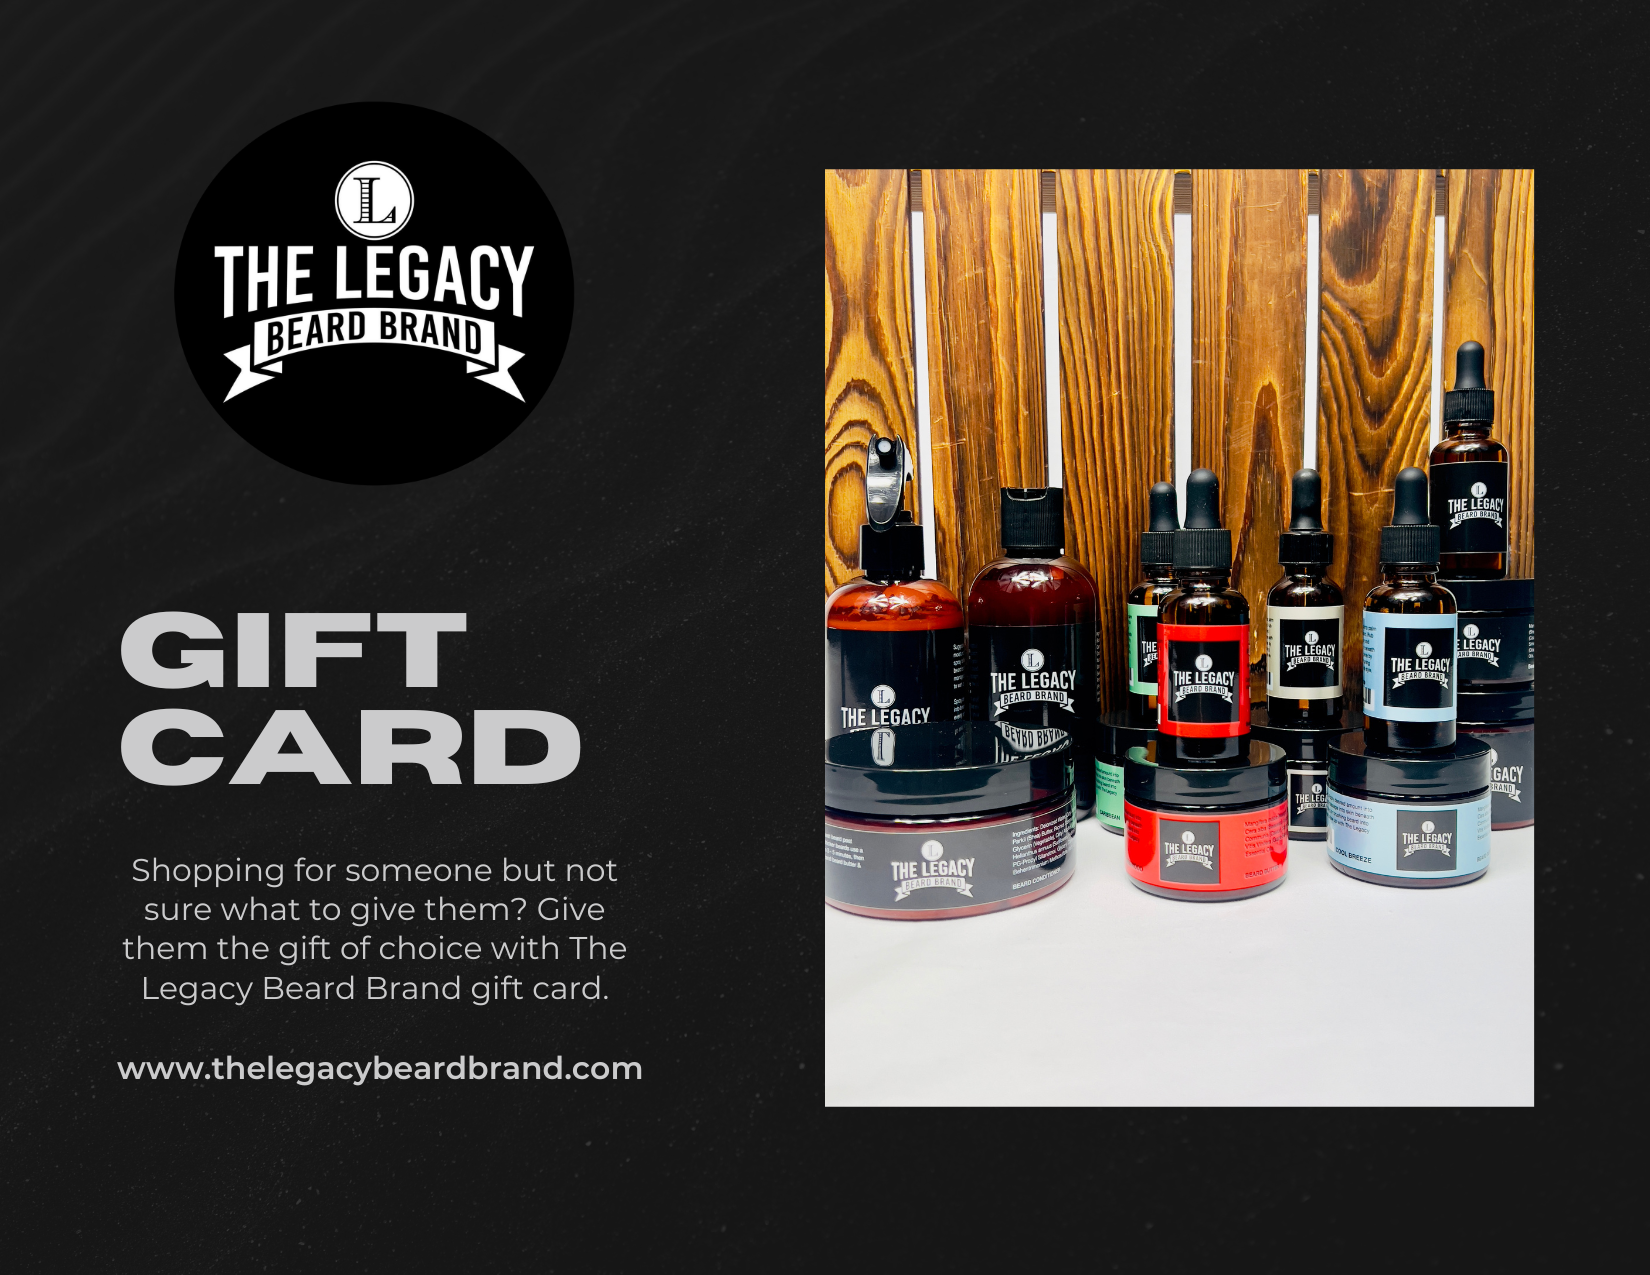 Digital GIFT CARD  The Best Tasting Gift in The Game - Tacticalories  Seasoning Company